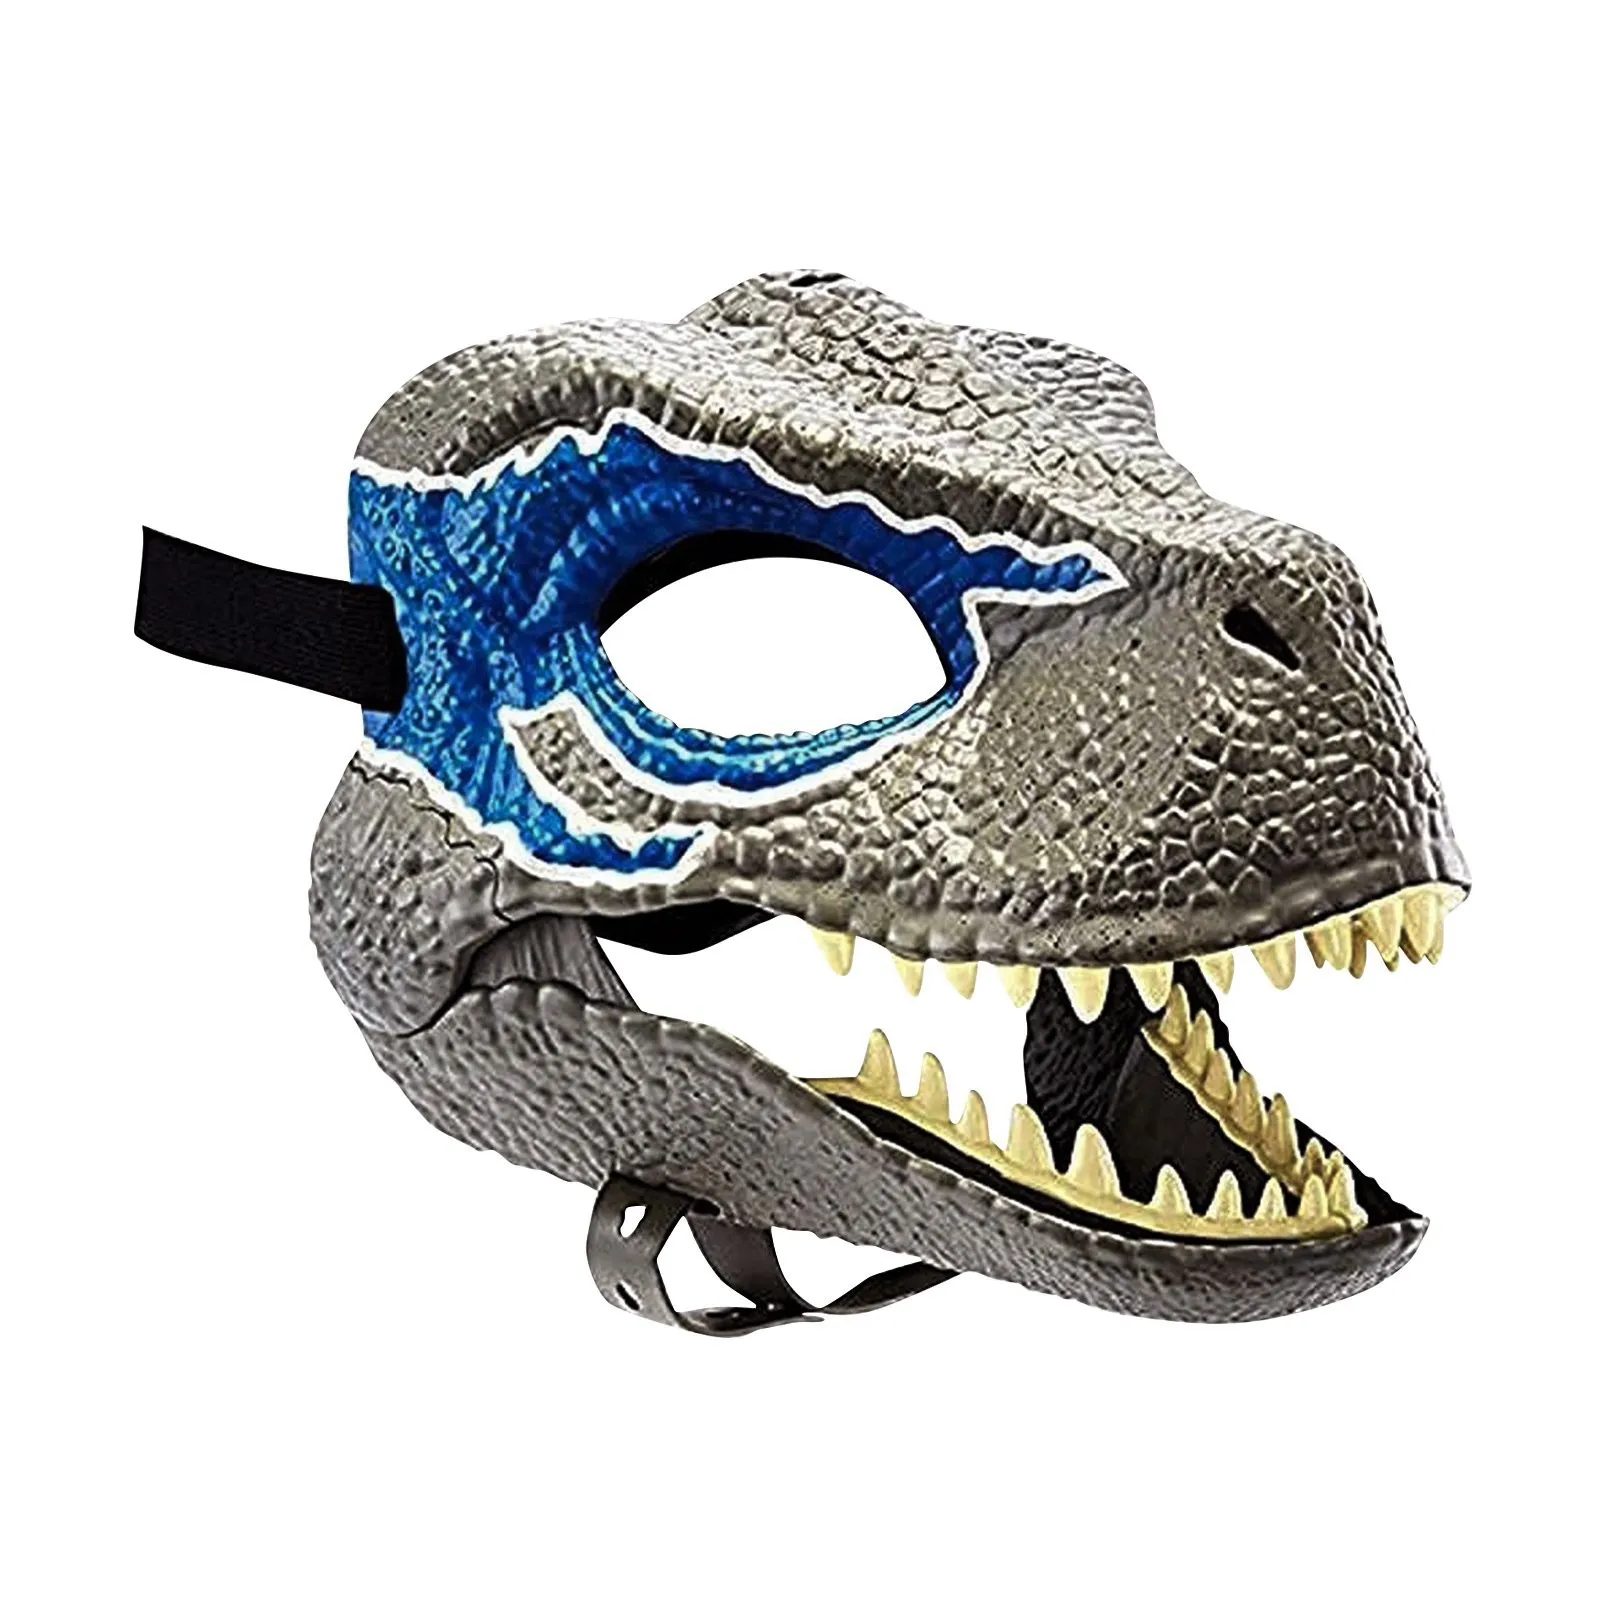 Dragon Mask New Movable Jaw Dino Moving Dinosaur Decor For Halloween Party Cosplay Decoration Funny Toy Gifts | Тематическая одежда